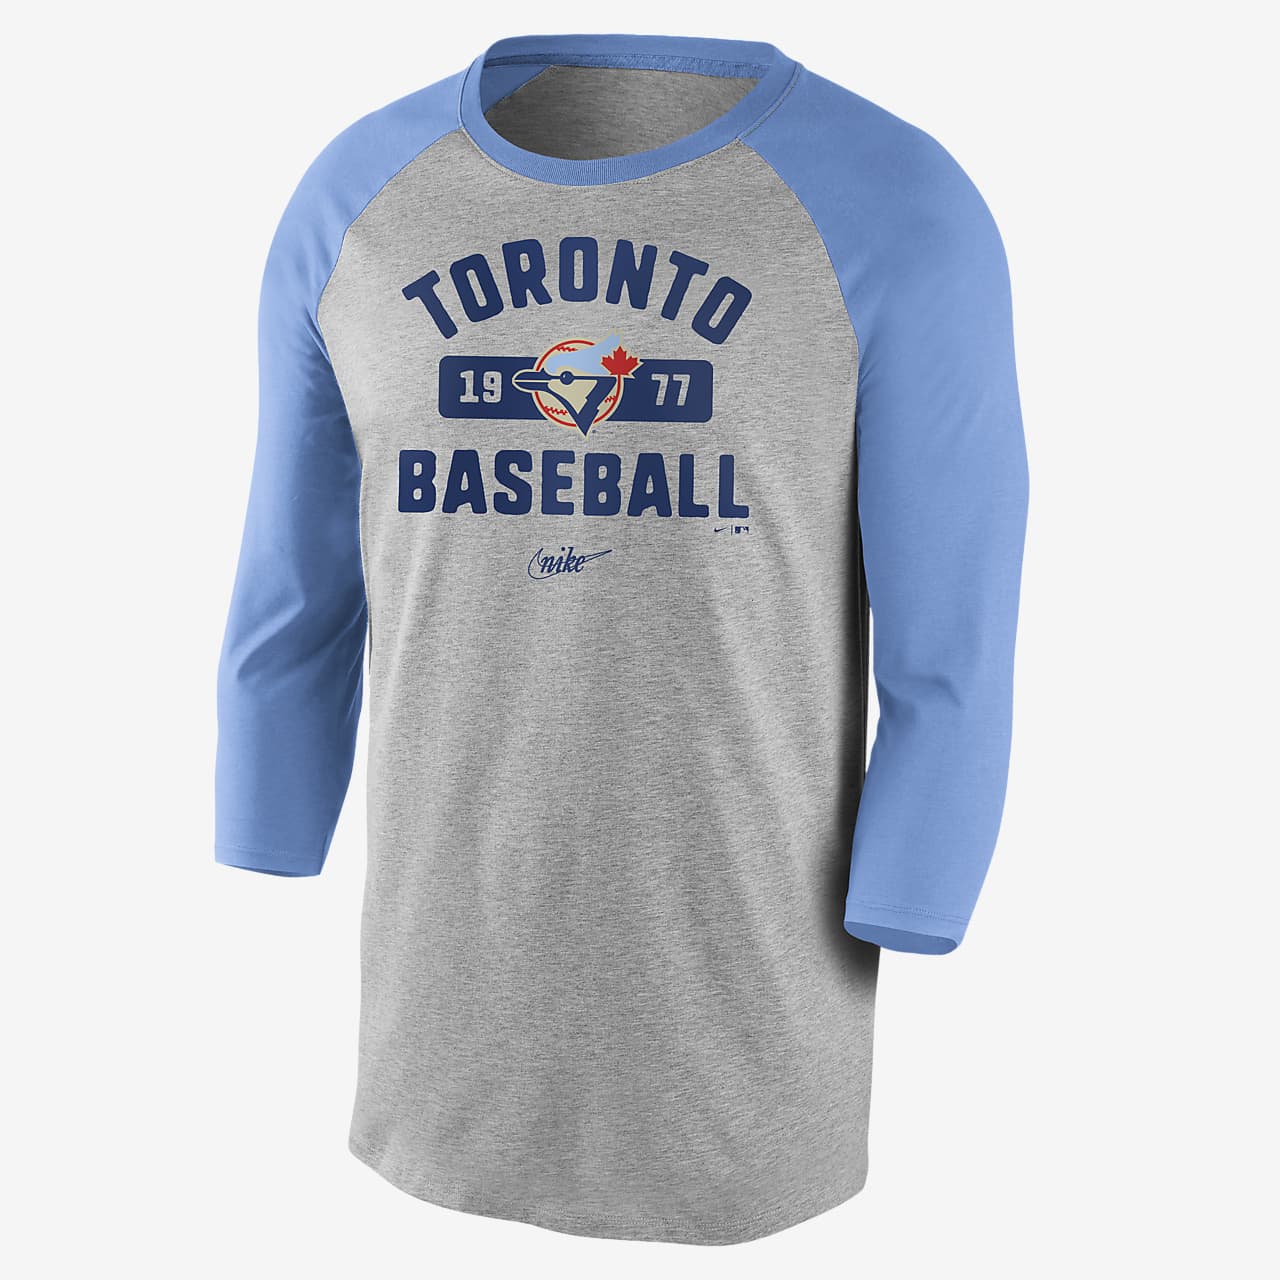 personalized blue jays jersey canada